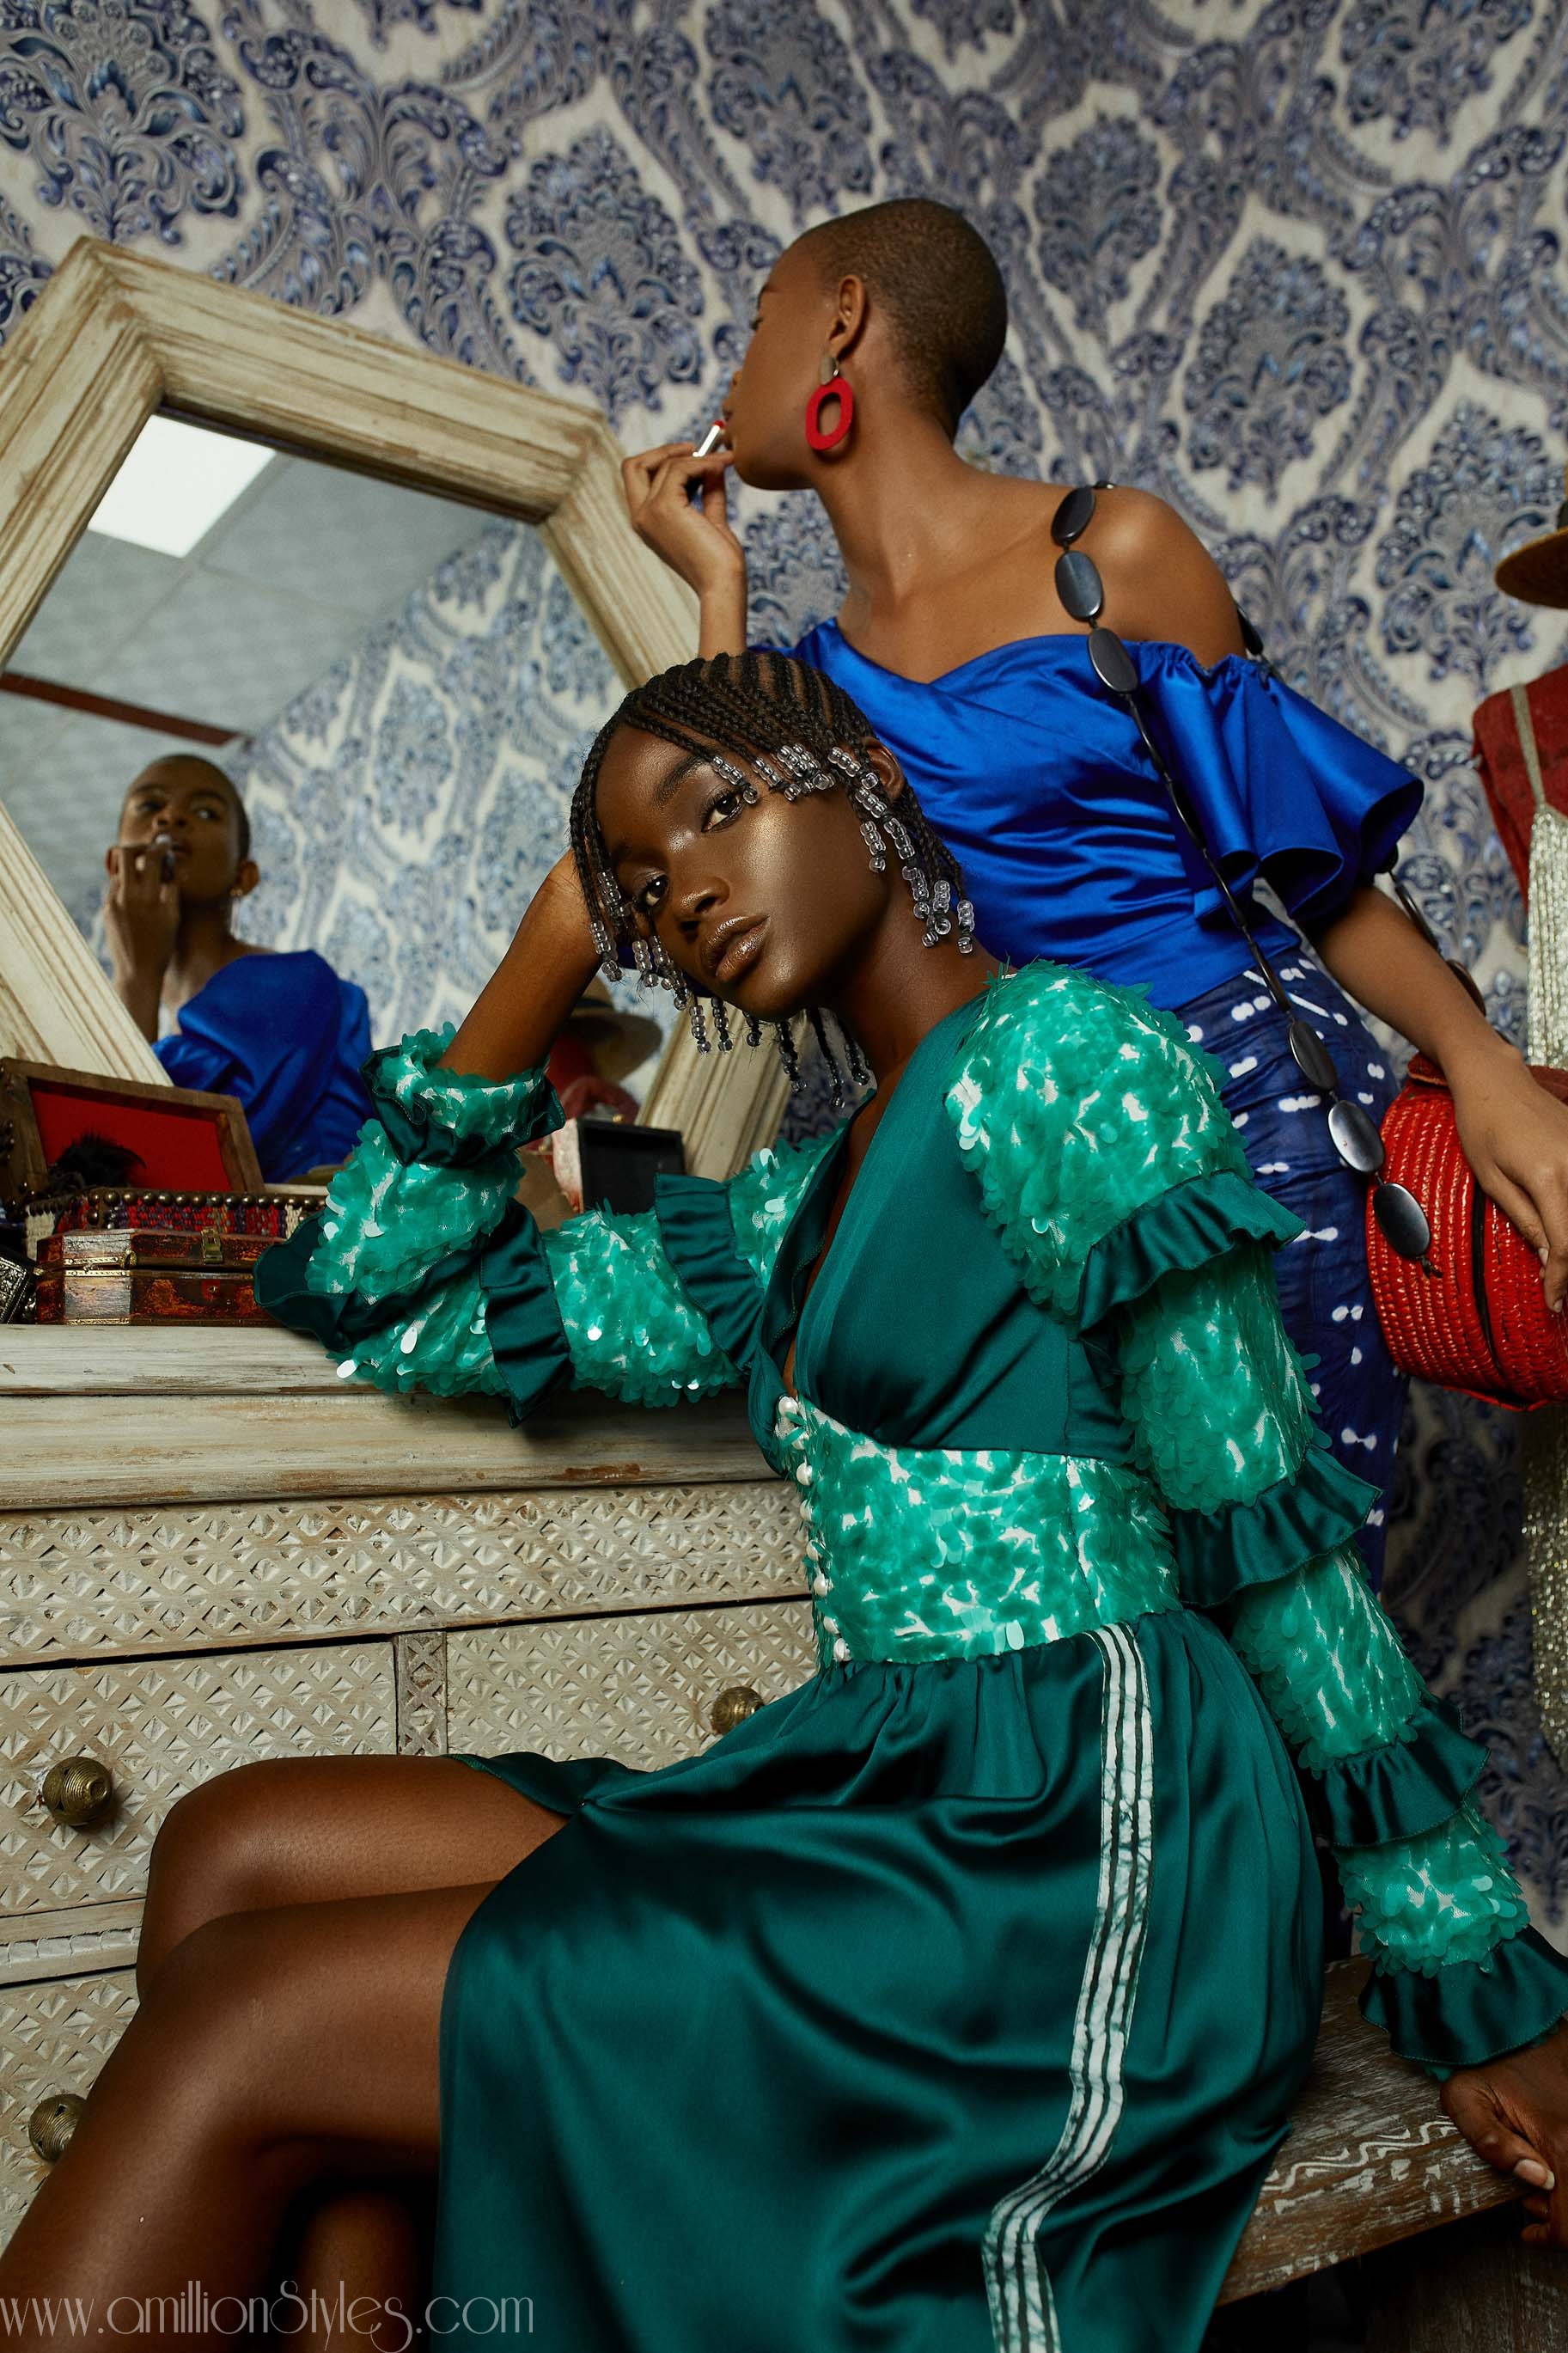 Vintage At It's Finest As Mazelle Releases It's Summer 2019 Collection